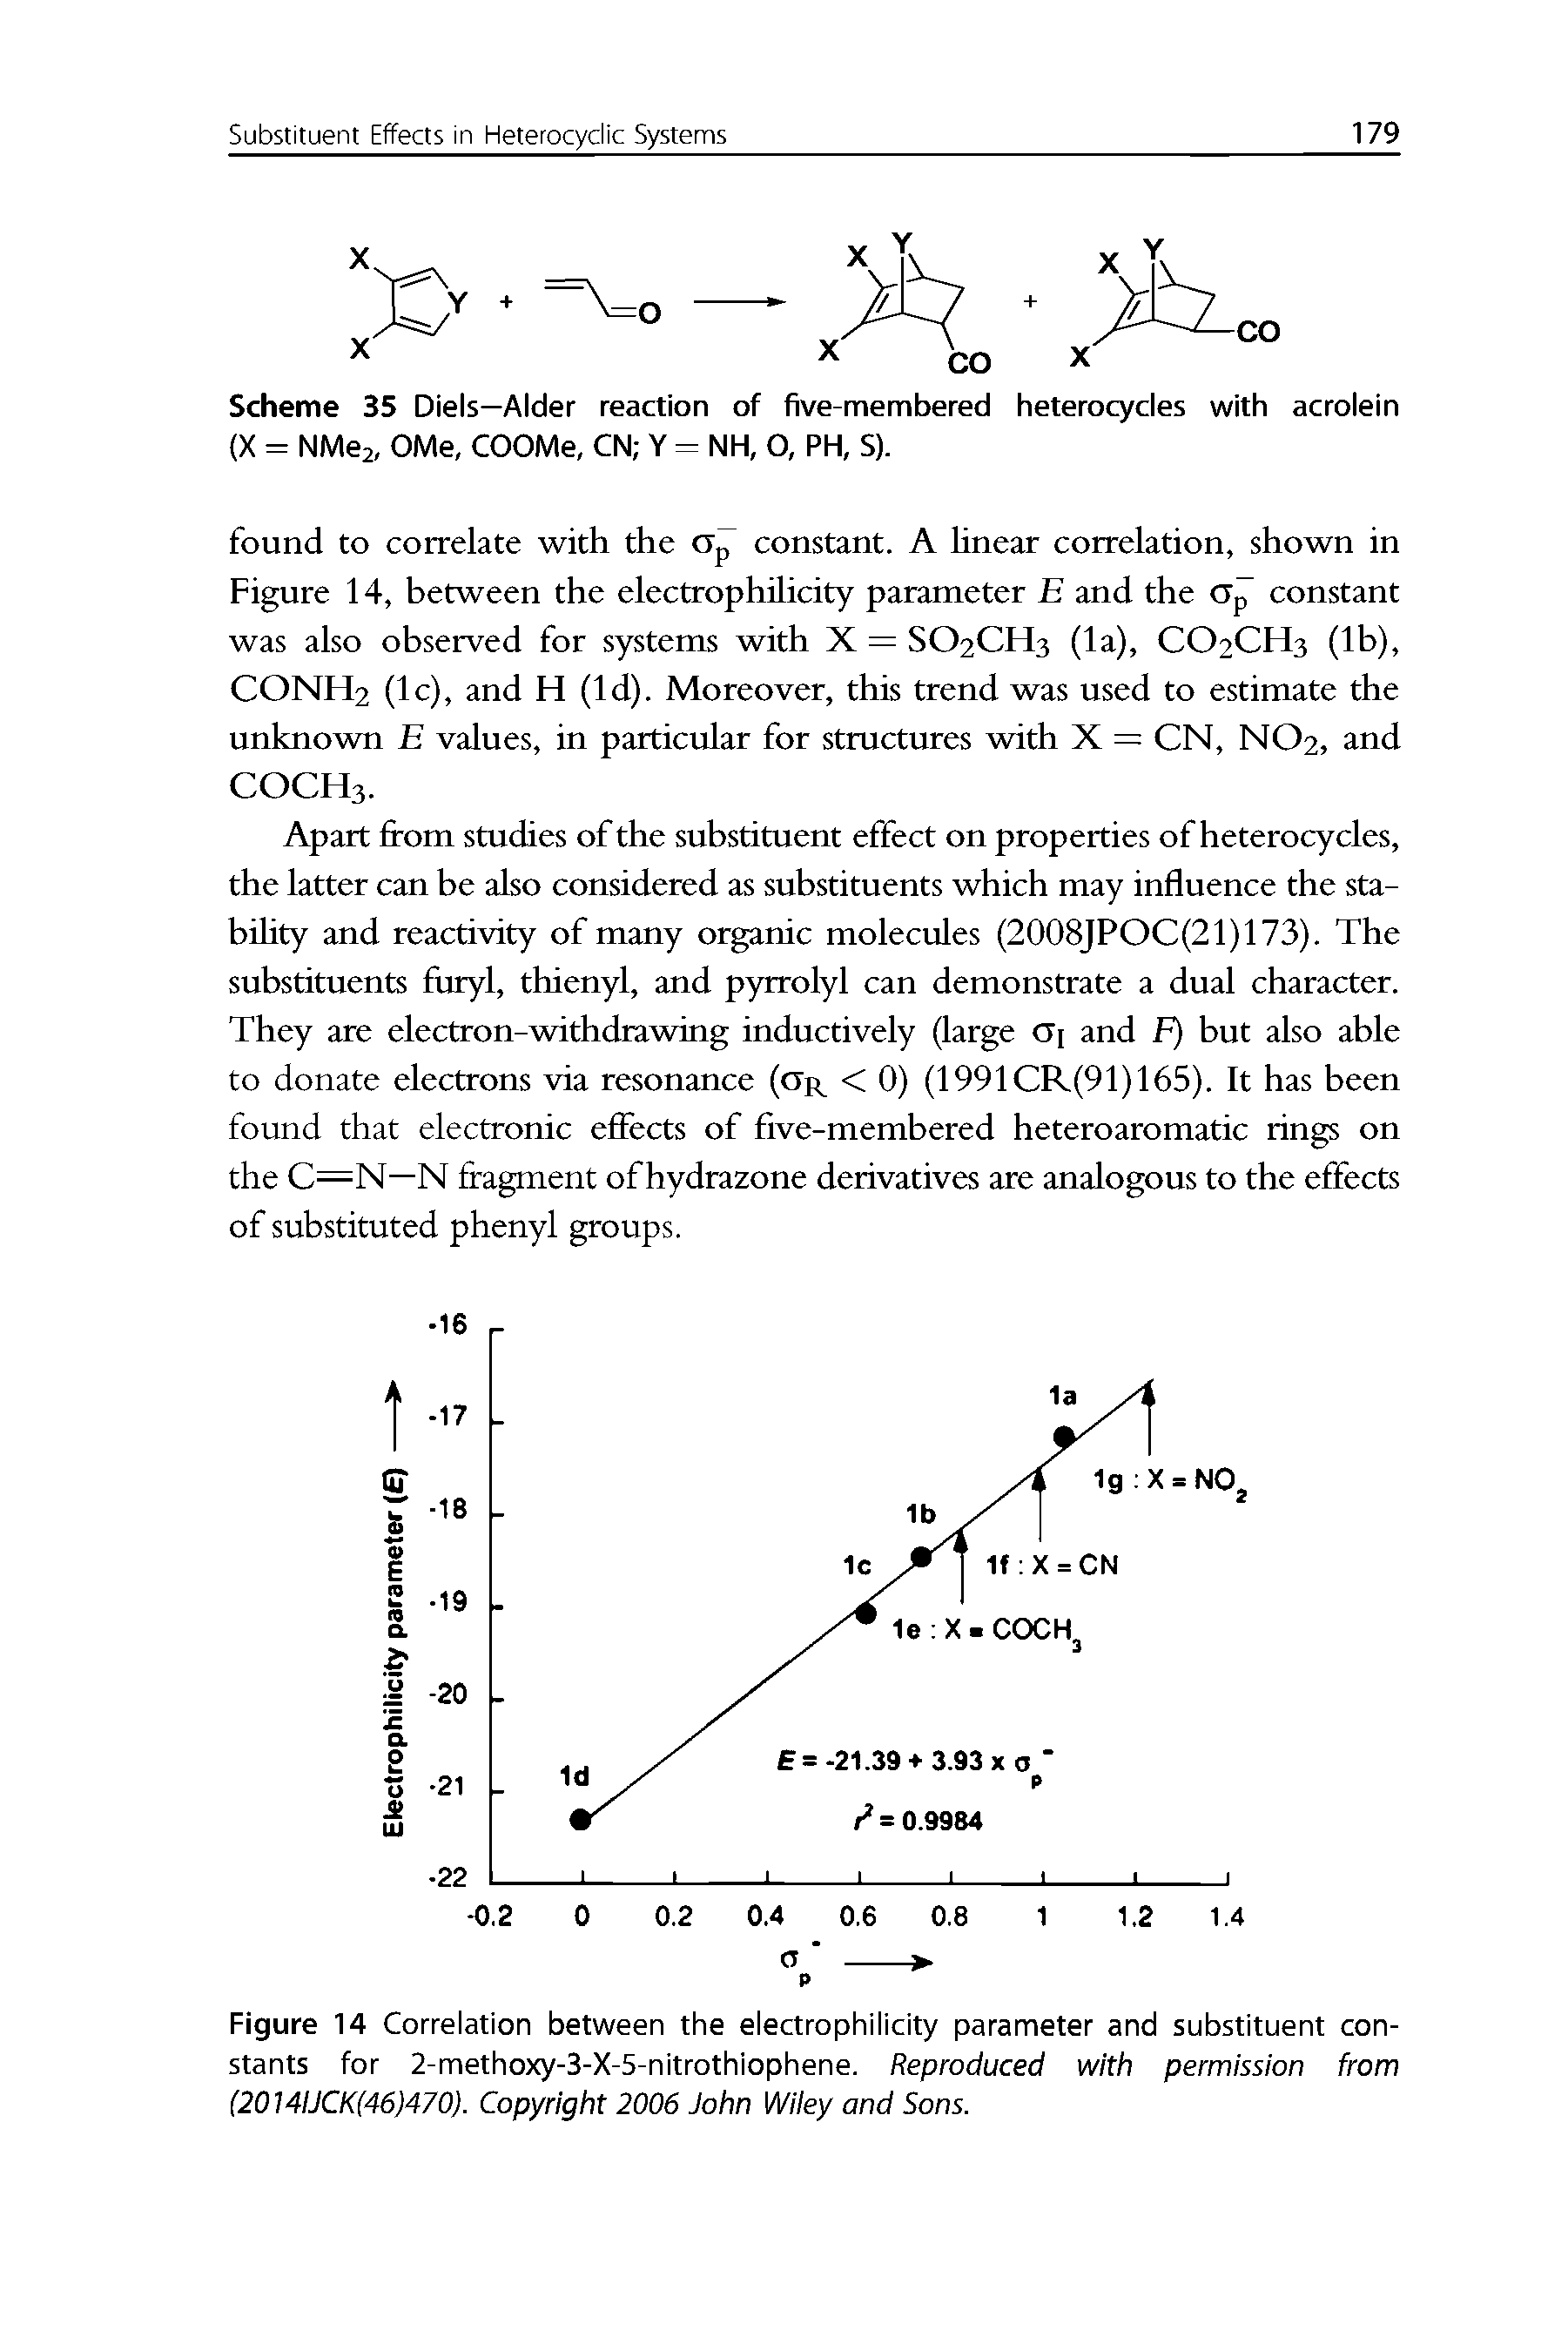 Figure 14 Correlation between the electrophilicity parameter and substituent constants for 2-methoxy-3-X-5-nitrothiophene. Reproduced with permission from (2014iJCK(46)470). Copyright 2006 John Wiiey and Sons.